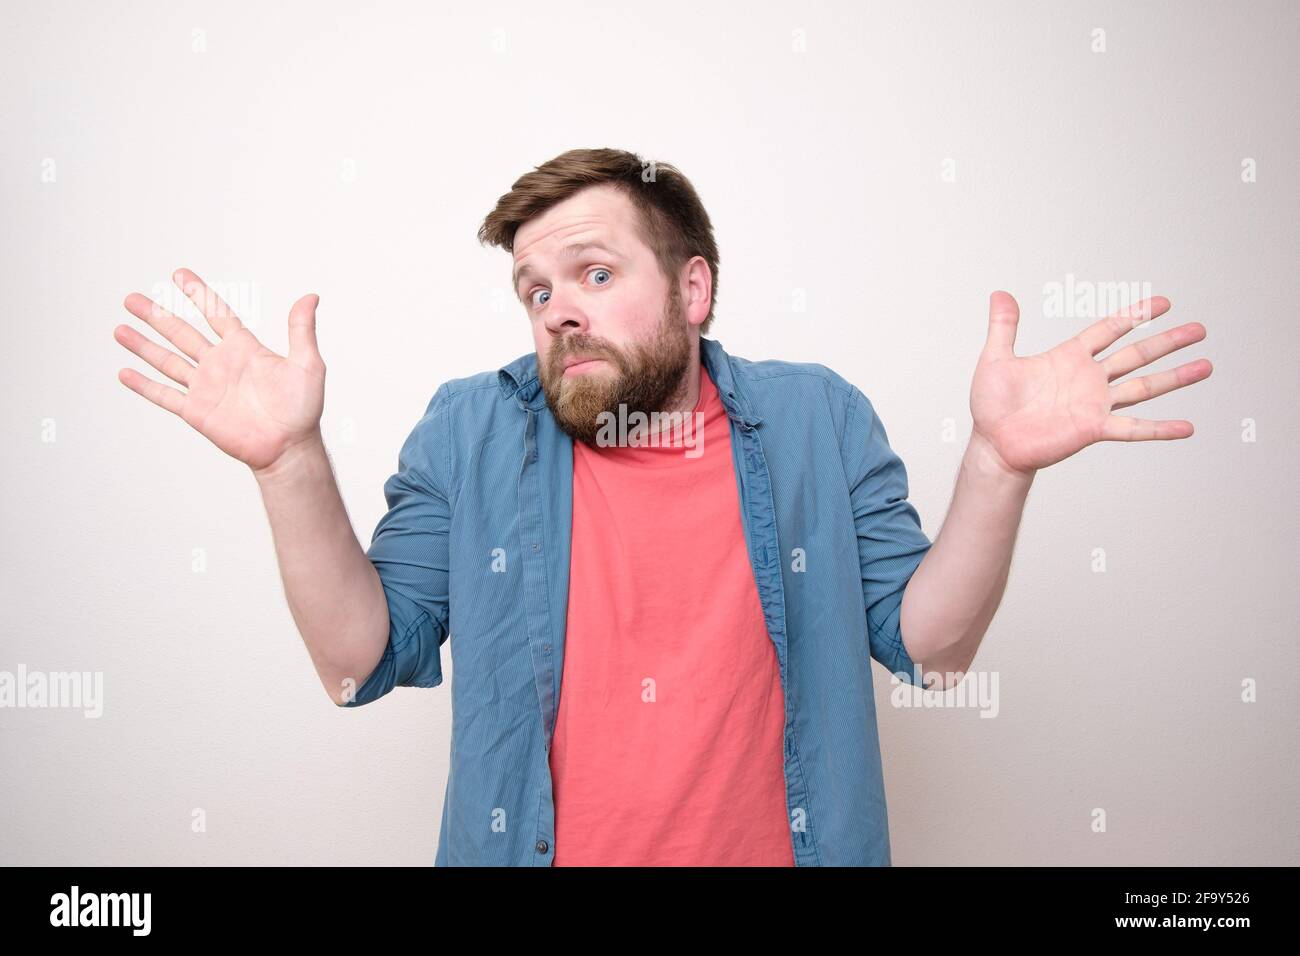 Surprised bearded man in bewilderment, he is innocent and makes a gesture with hands, open palms, looks at the camera.  Stock Photo